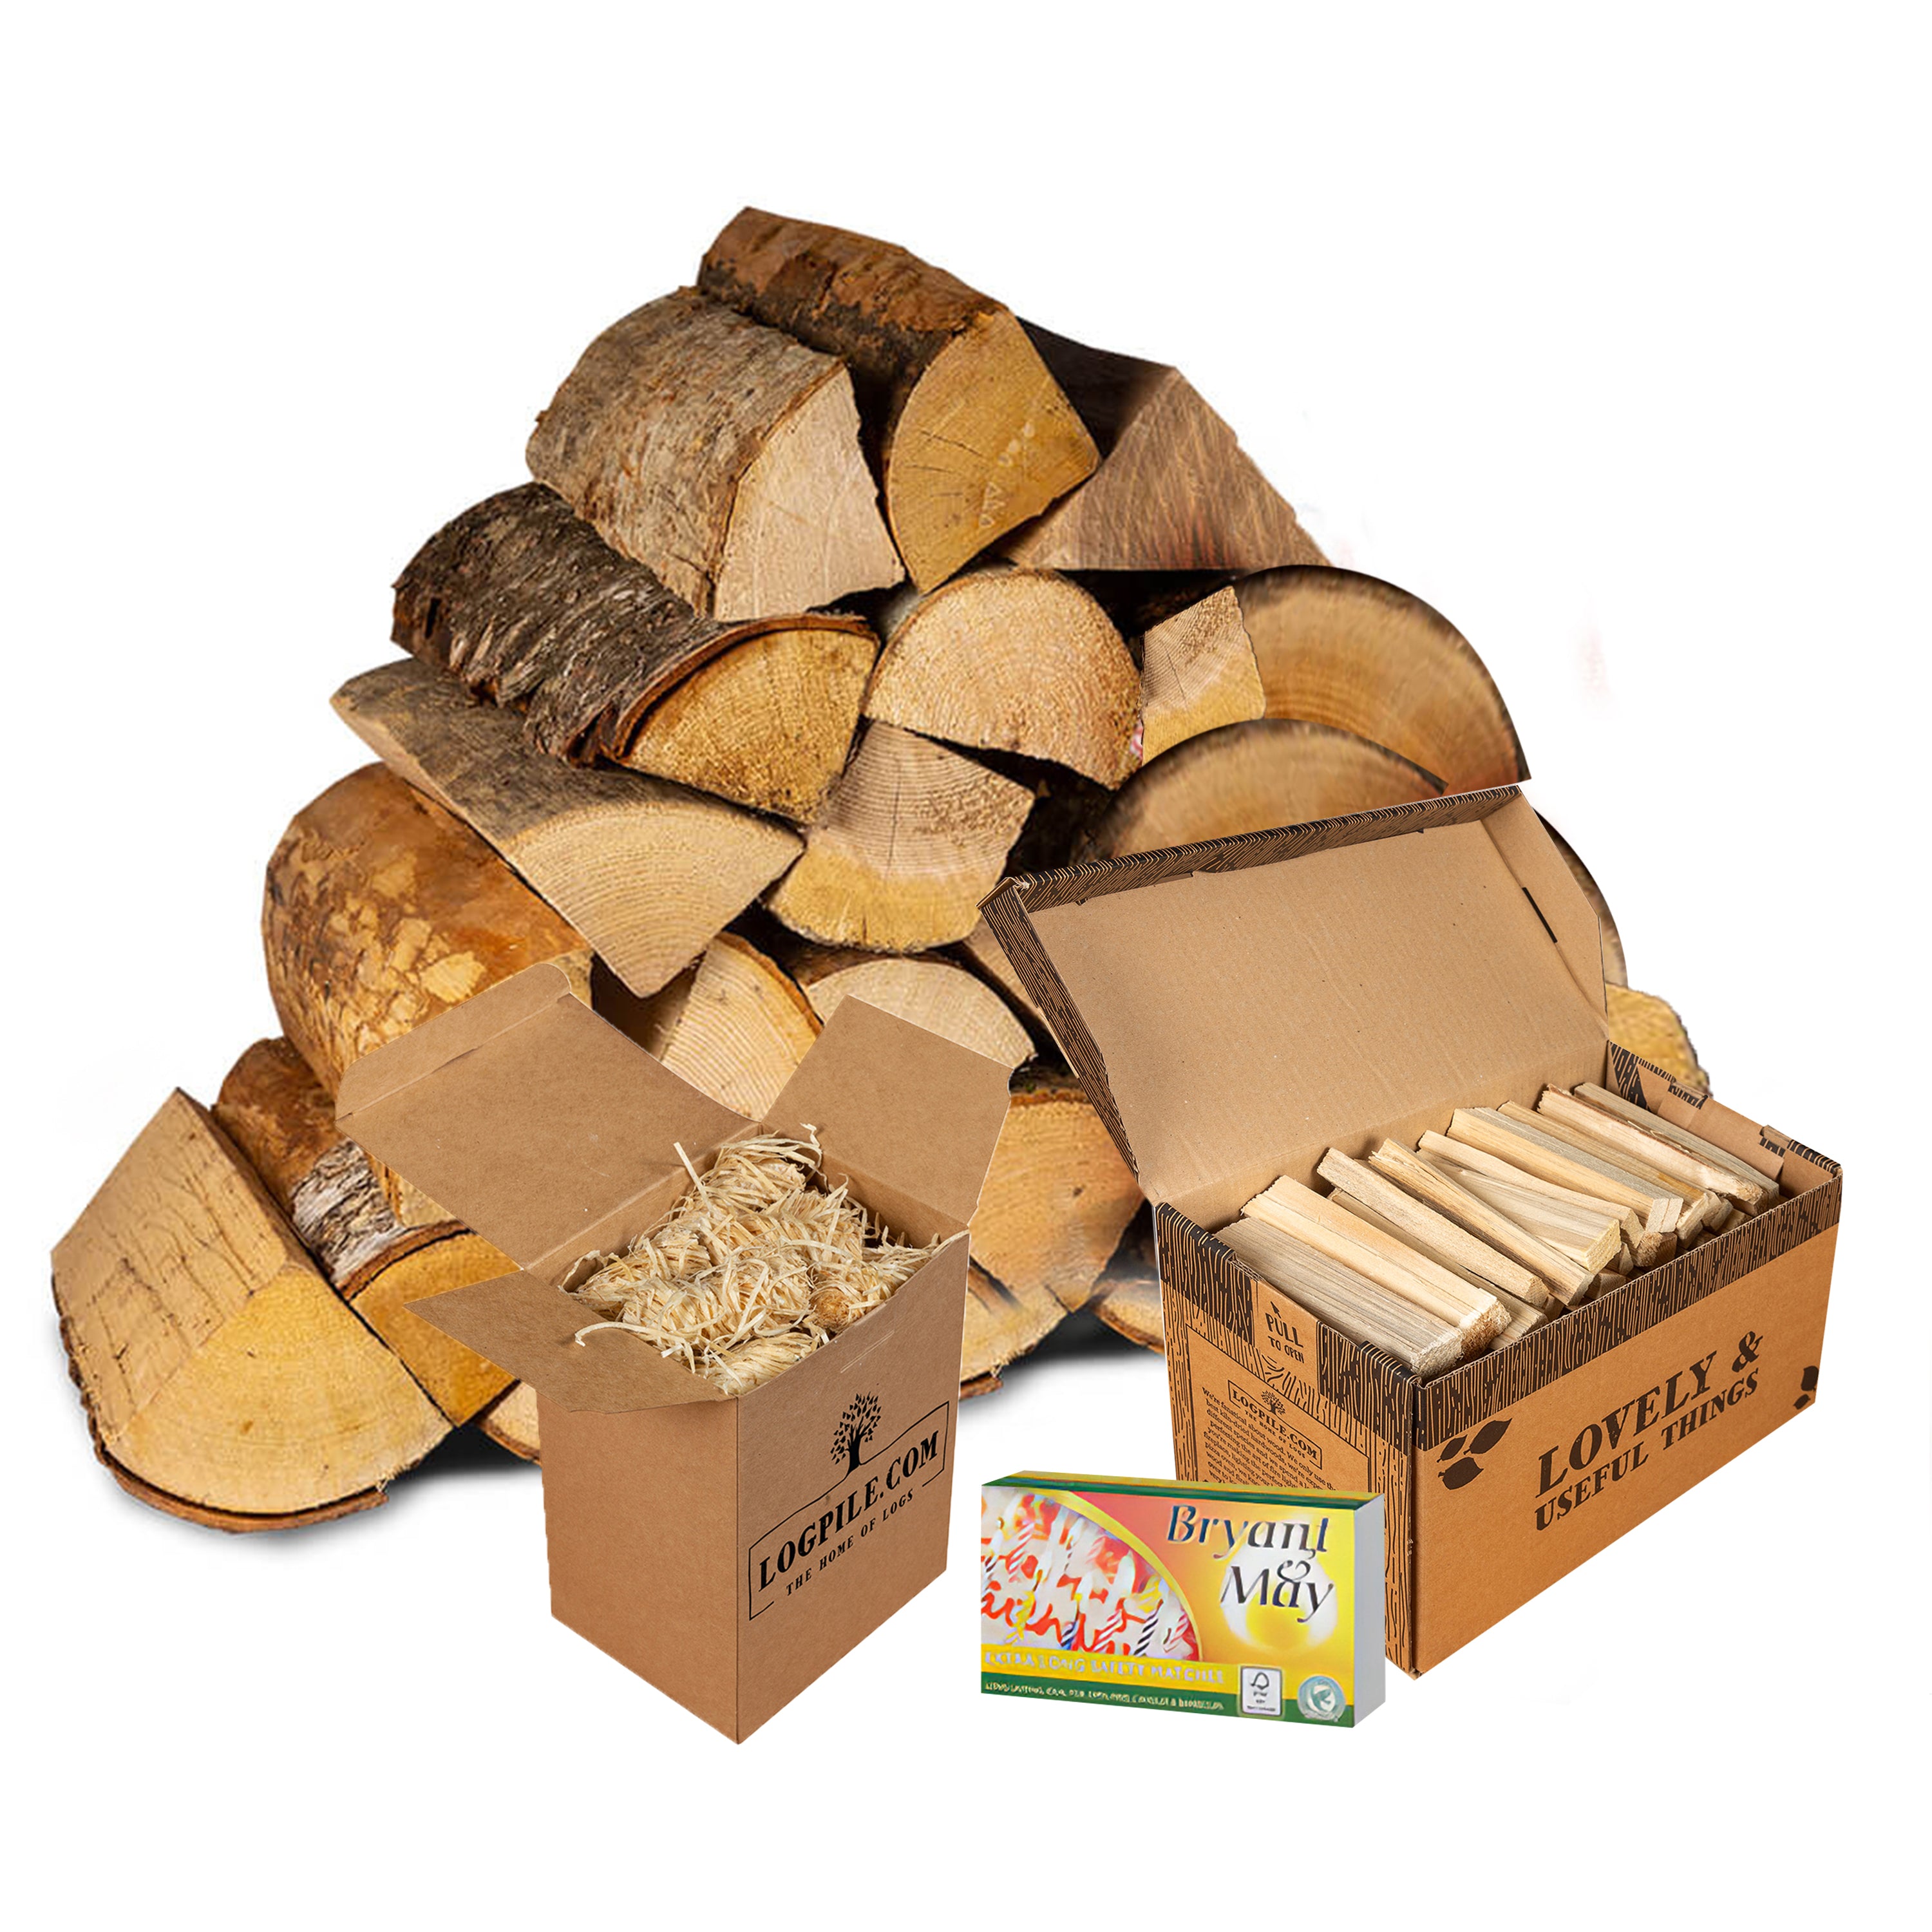 Pizza Oven Starter Kit. Big Pizza Oven Hardwood Logs, Kindling, Natural Firelighters and Matches